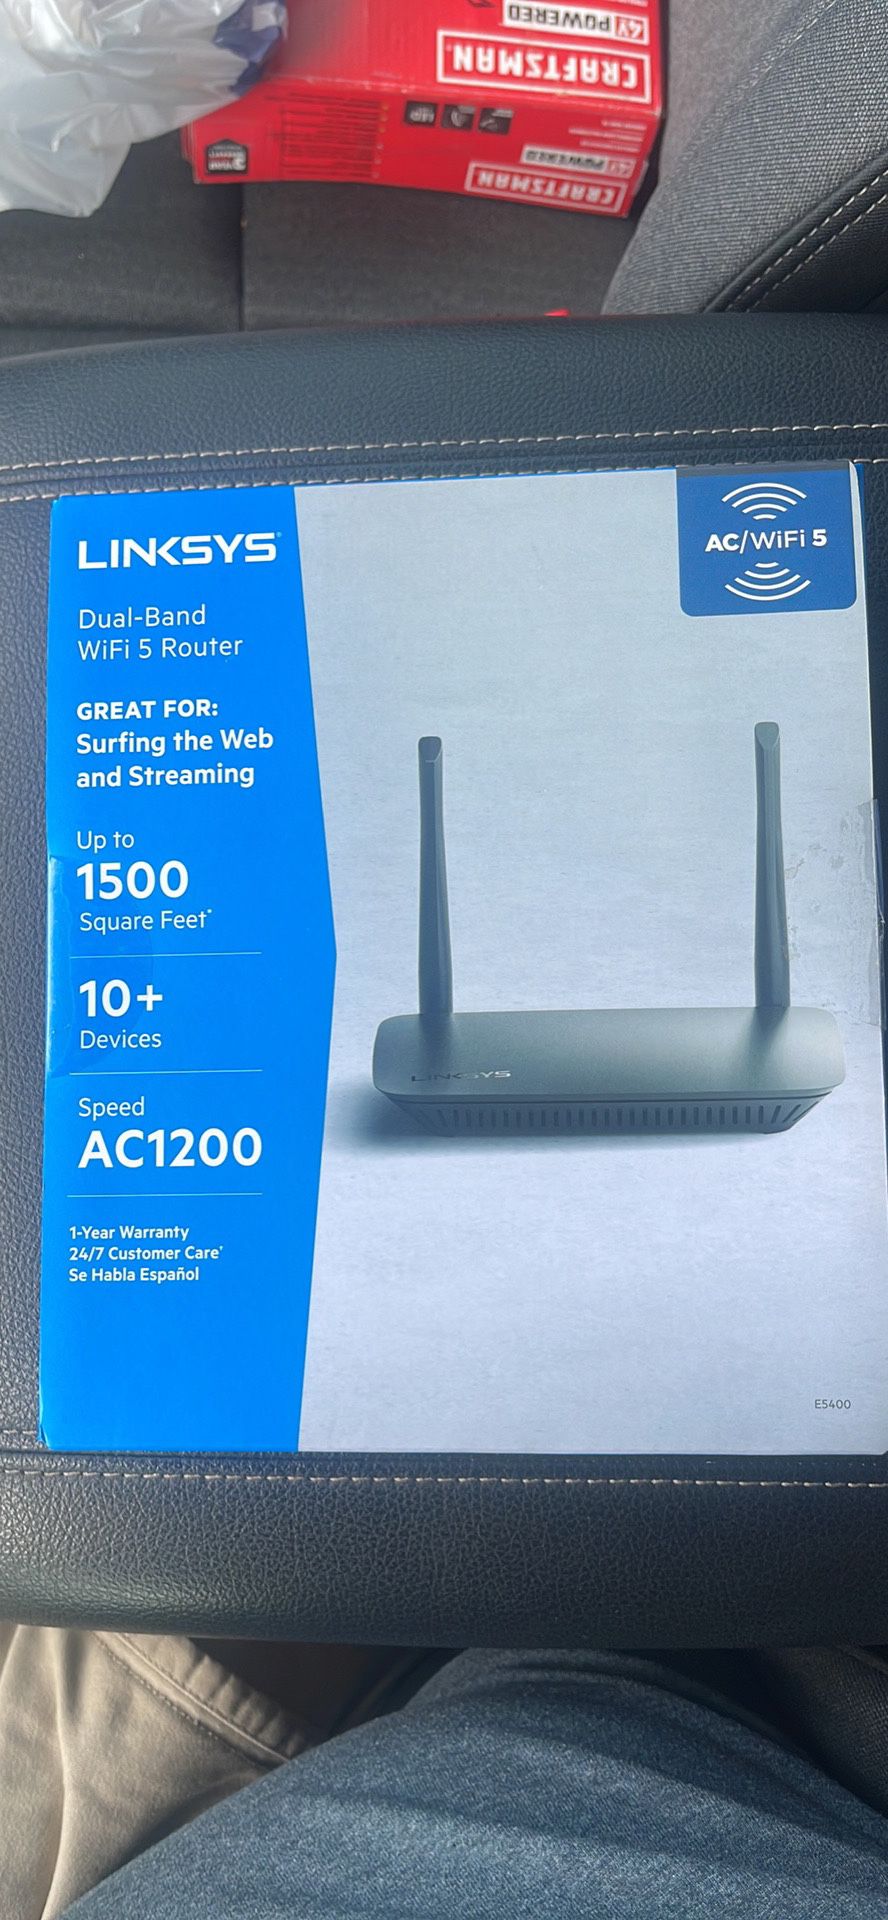 New Linksys E5400- WiFi 5 Router Dual-Band AC1200 New In Box. Never Opened. 